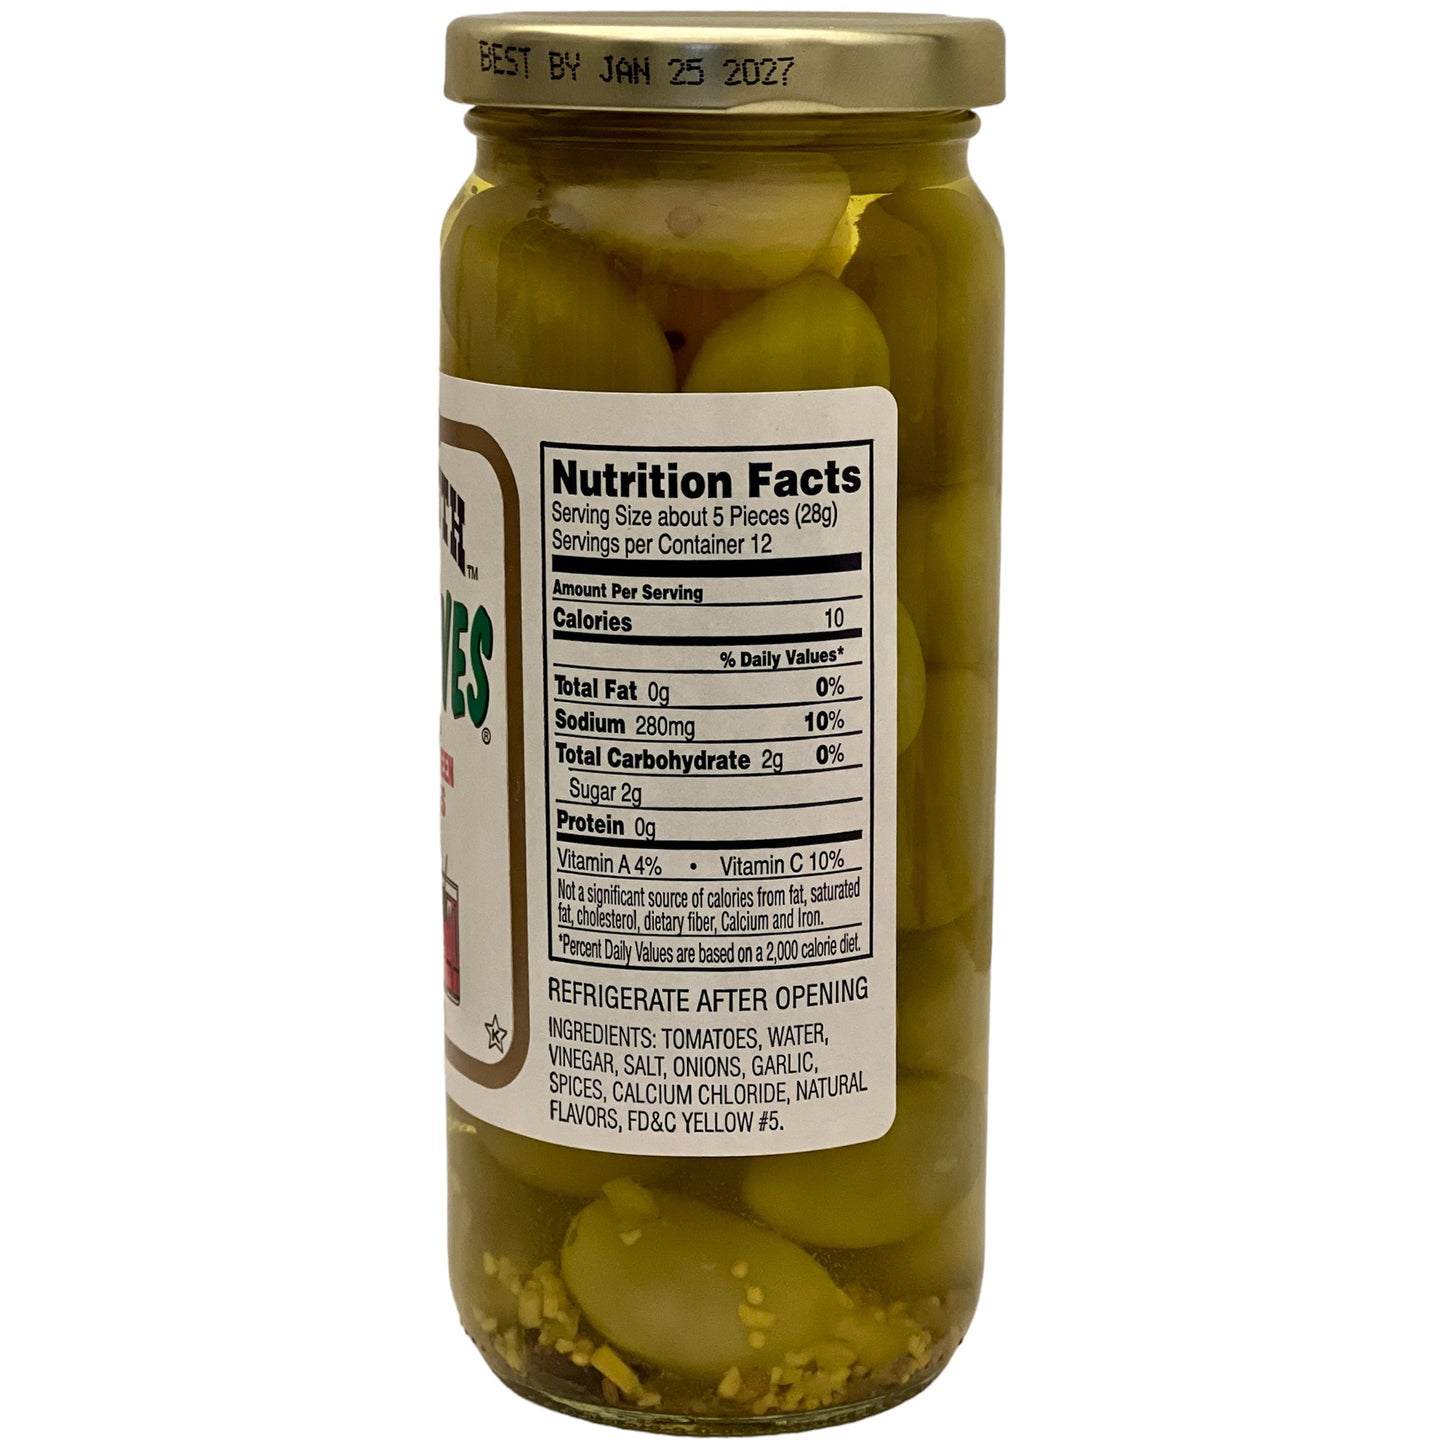 Old South Tomolives Brand Pickled Green Tomatoes - 16 oz